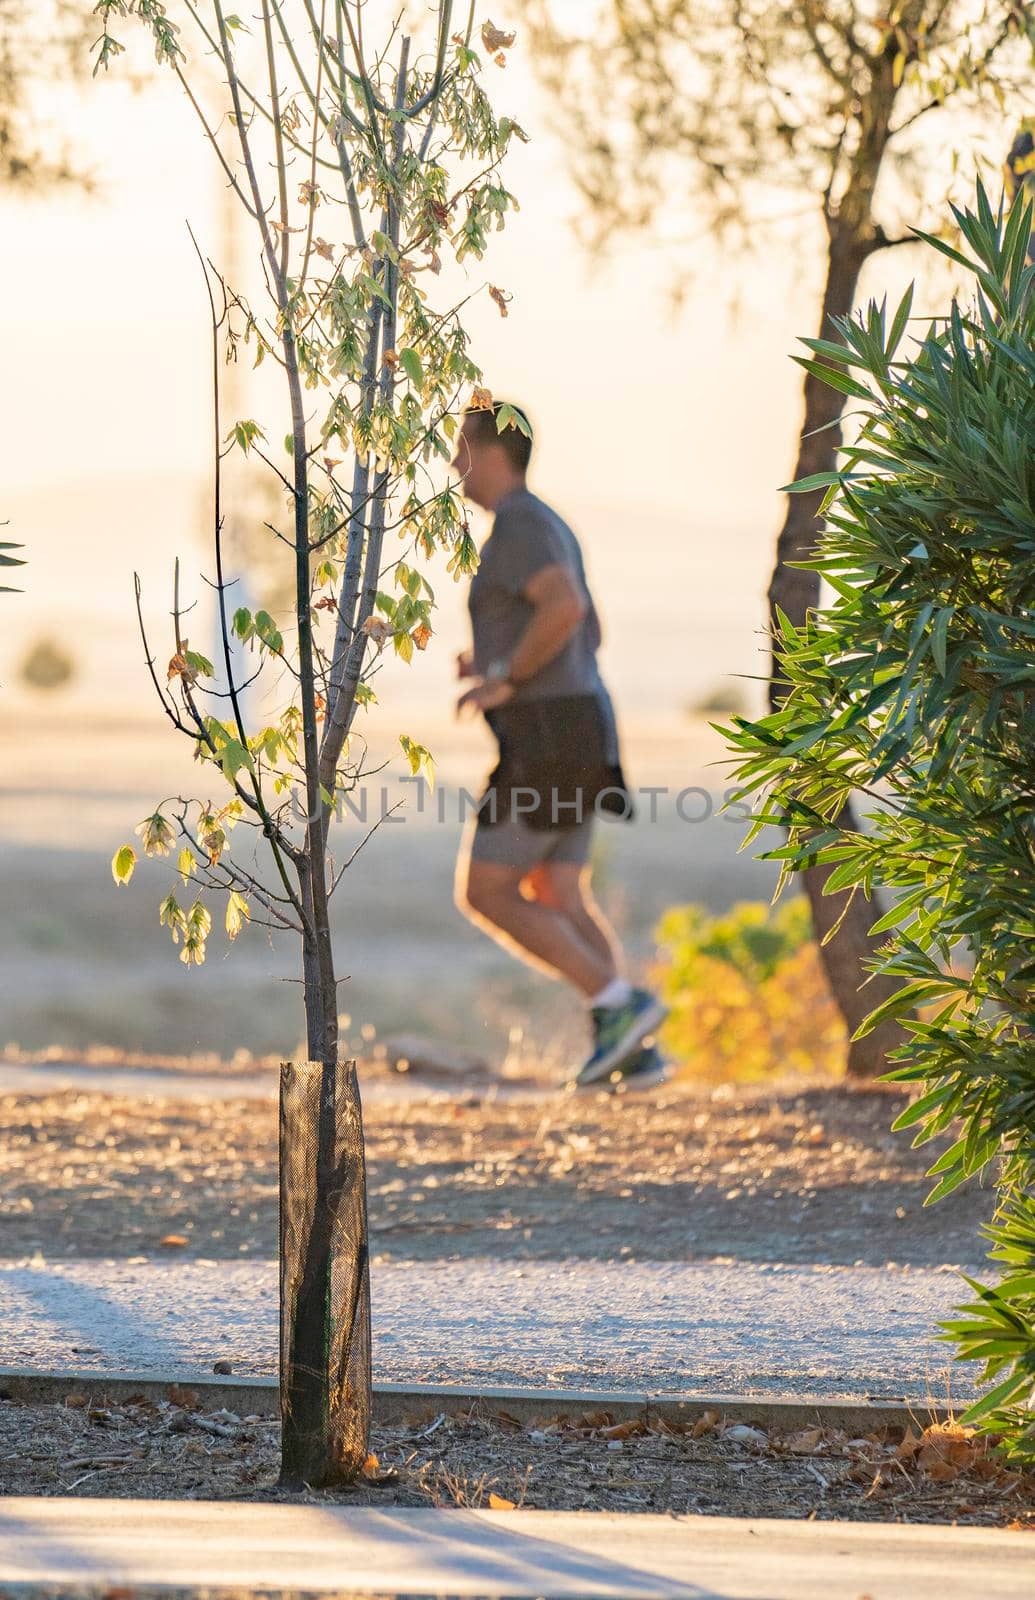 Defocused blurred runner in the background behind the trees with sun light tone. Beauty in nature image.